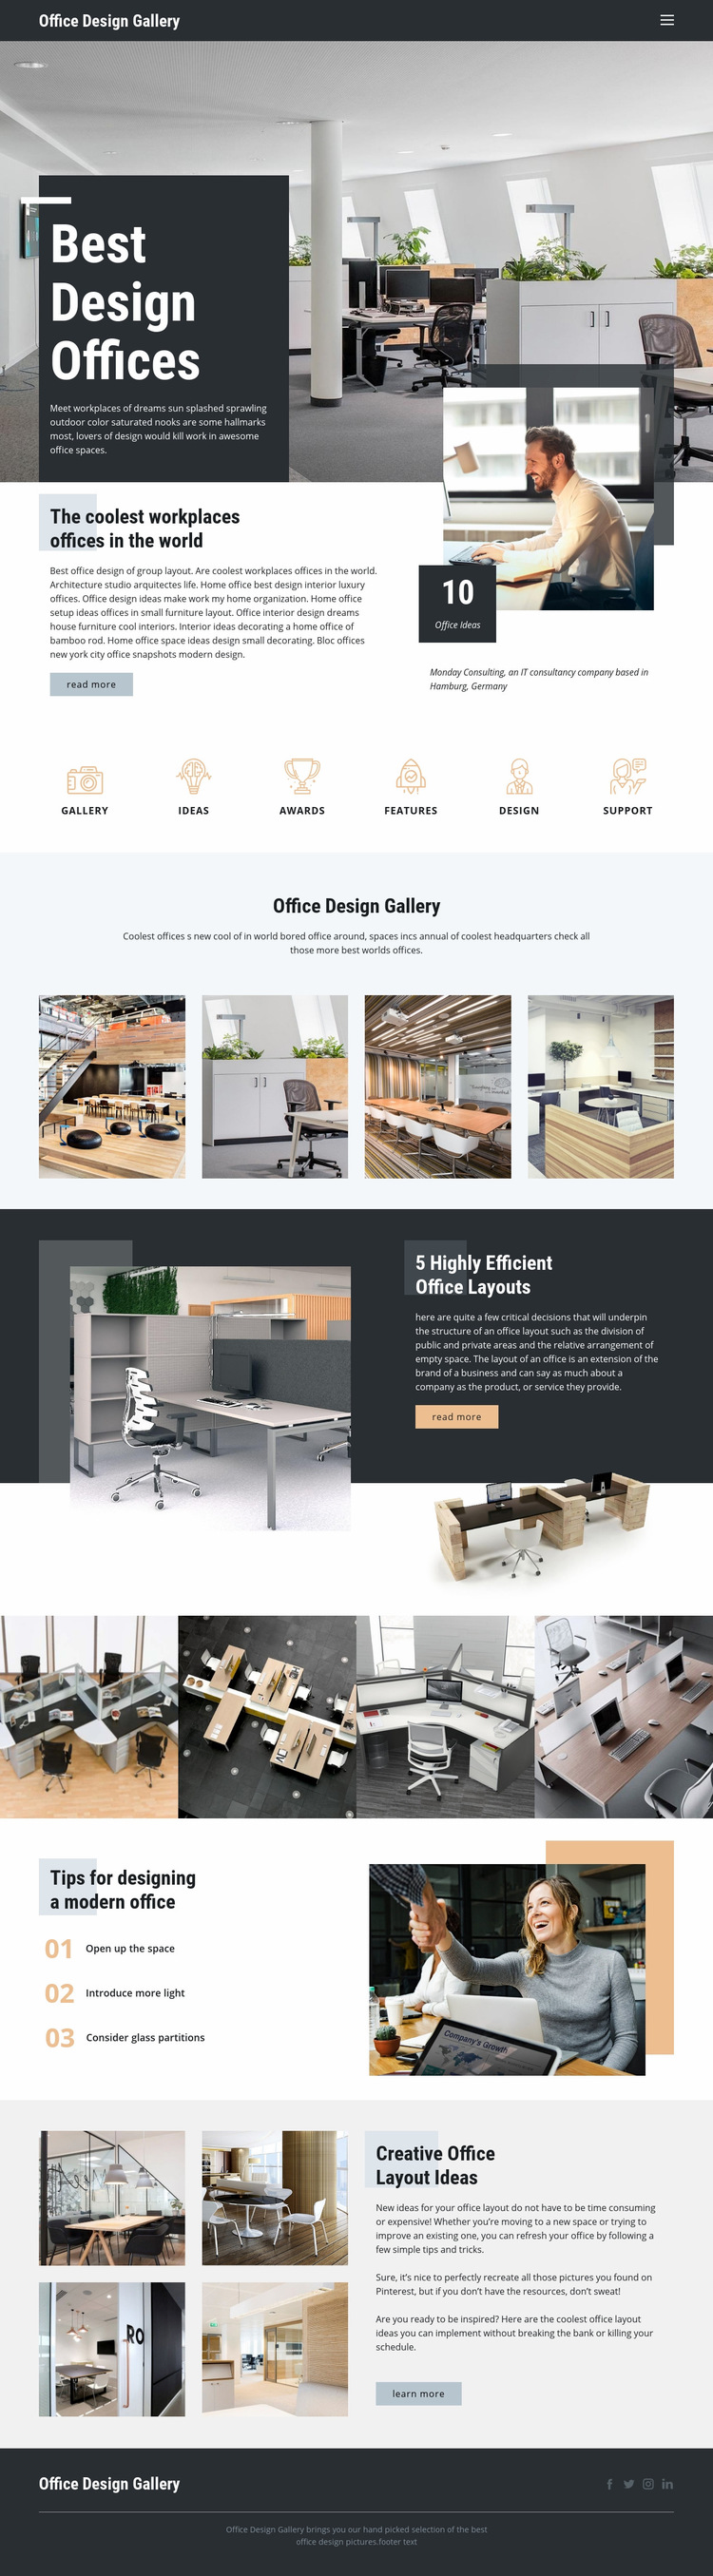 Best Design Offices Web Page